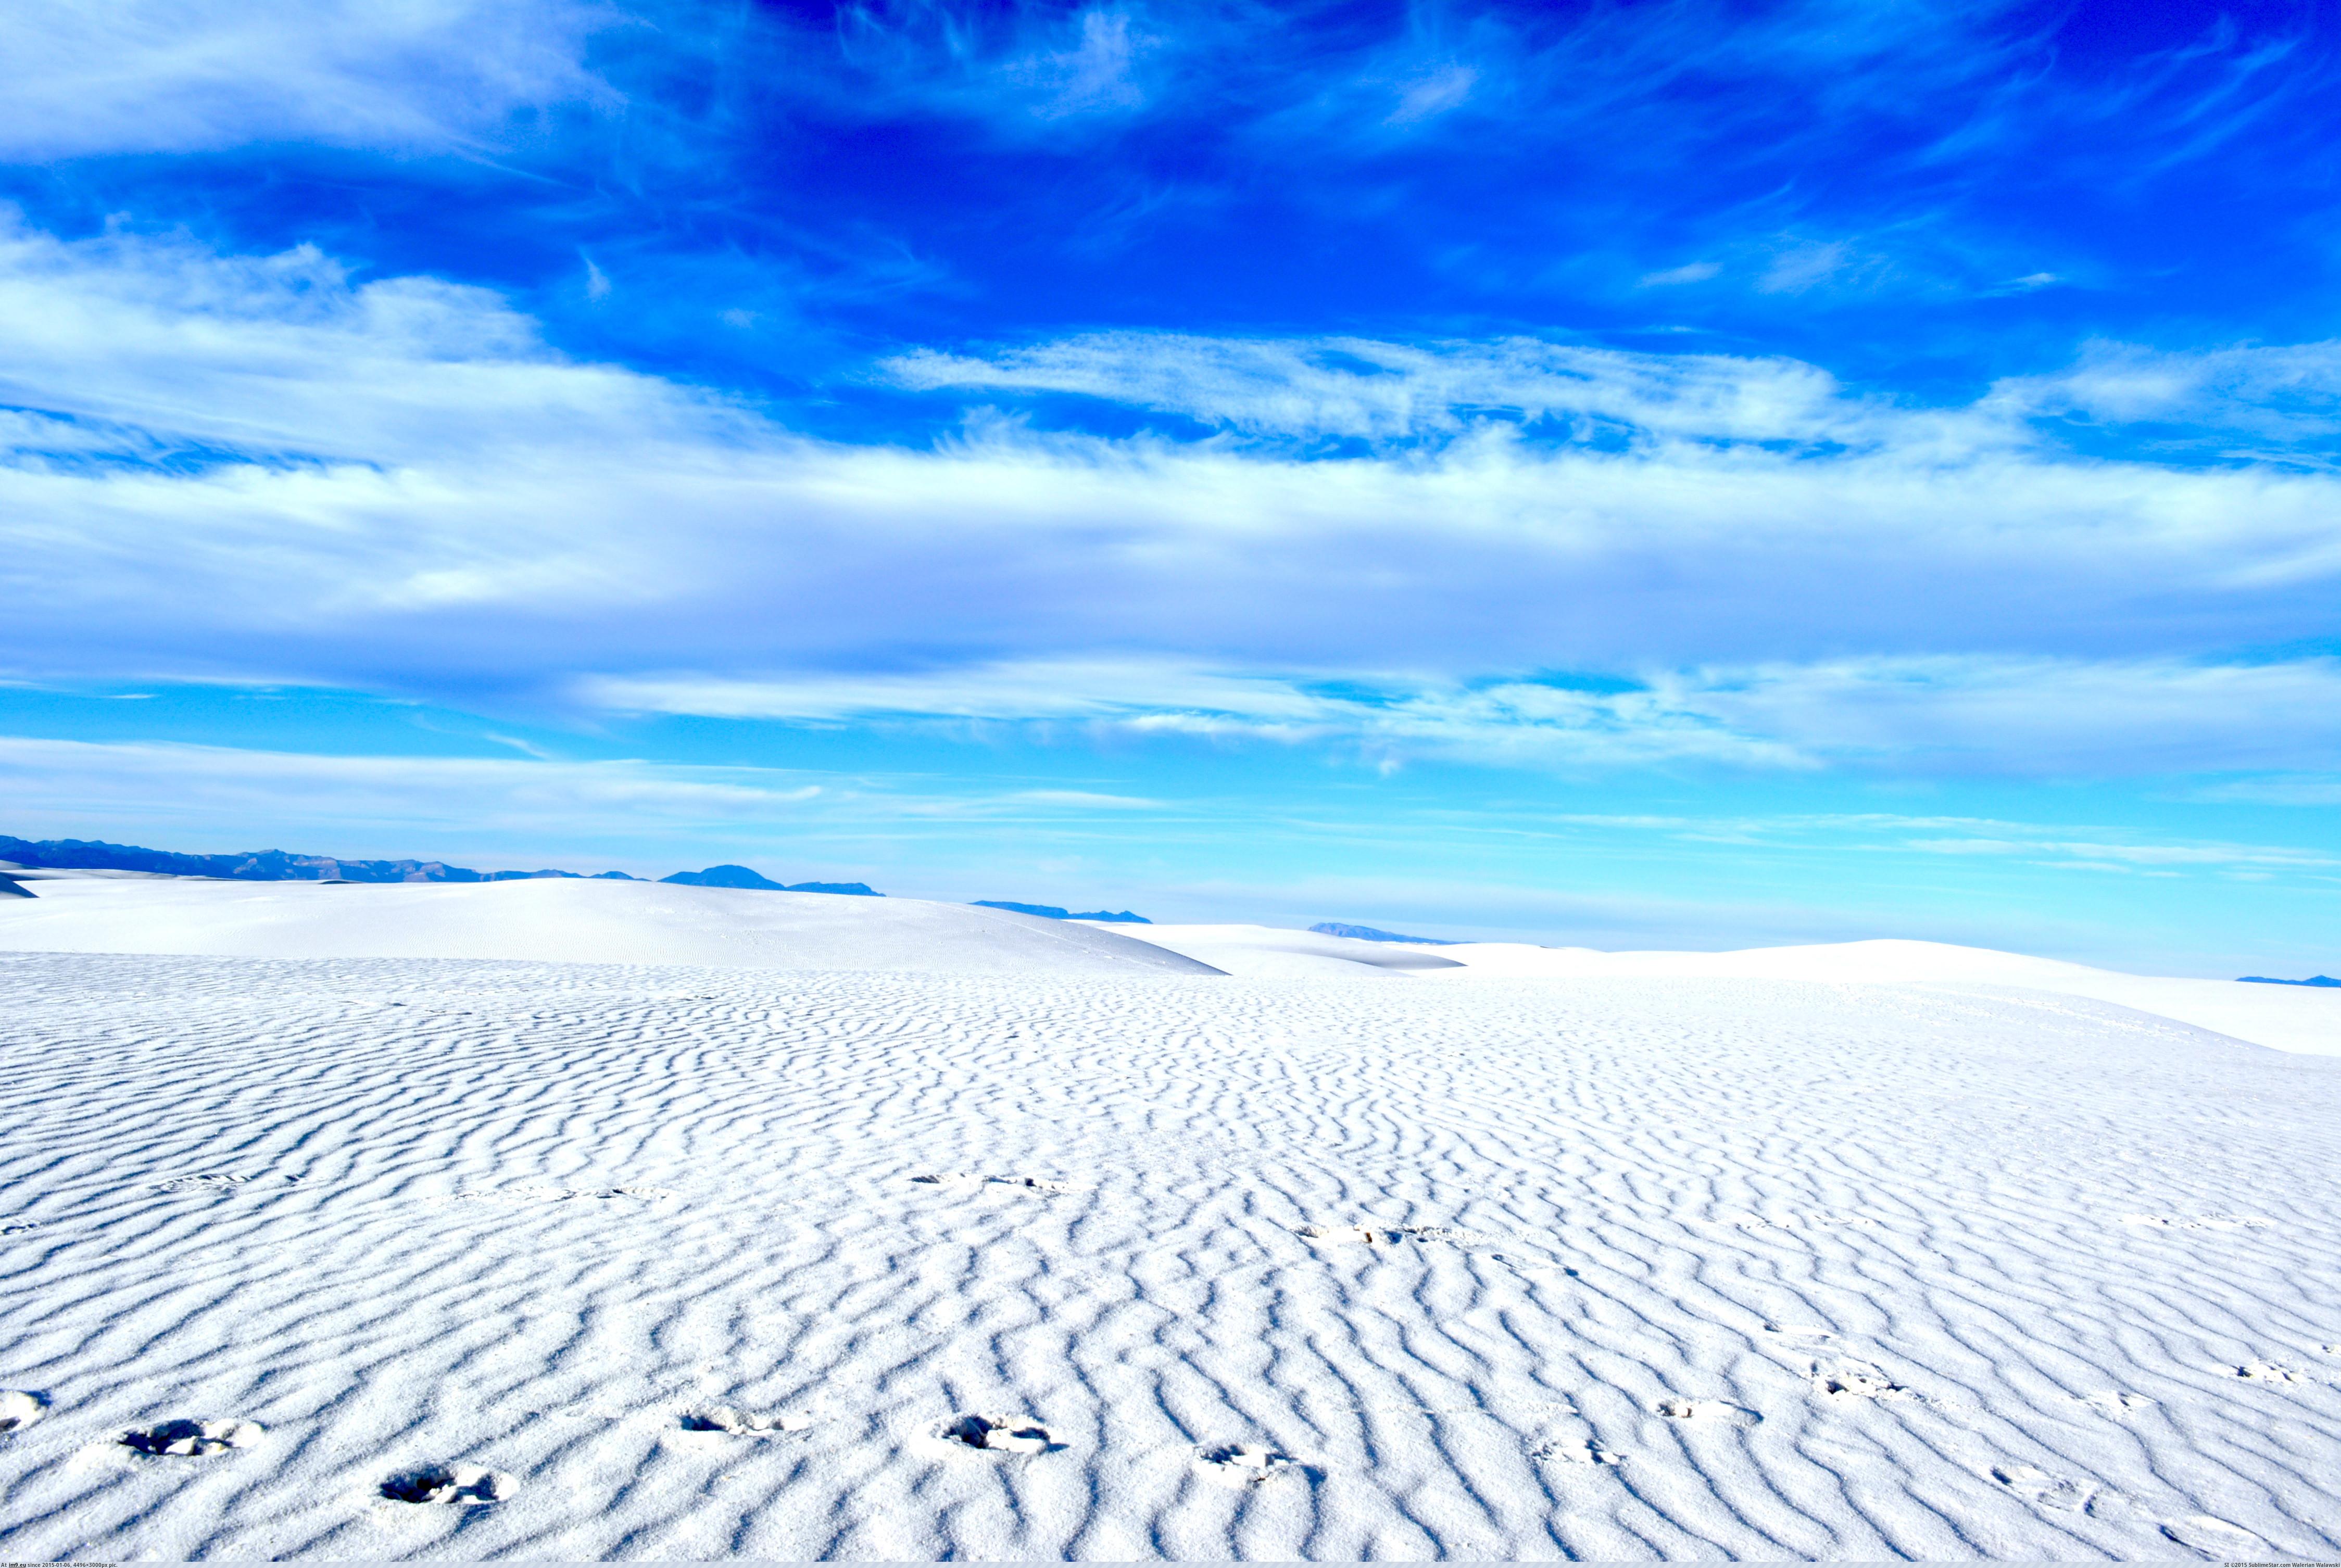 [Earthporn] I have been exploring America's hidden gems lately. This one is taken in White Sands National Monument, New Mexico.  (in My r/EARTHPORN favs)